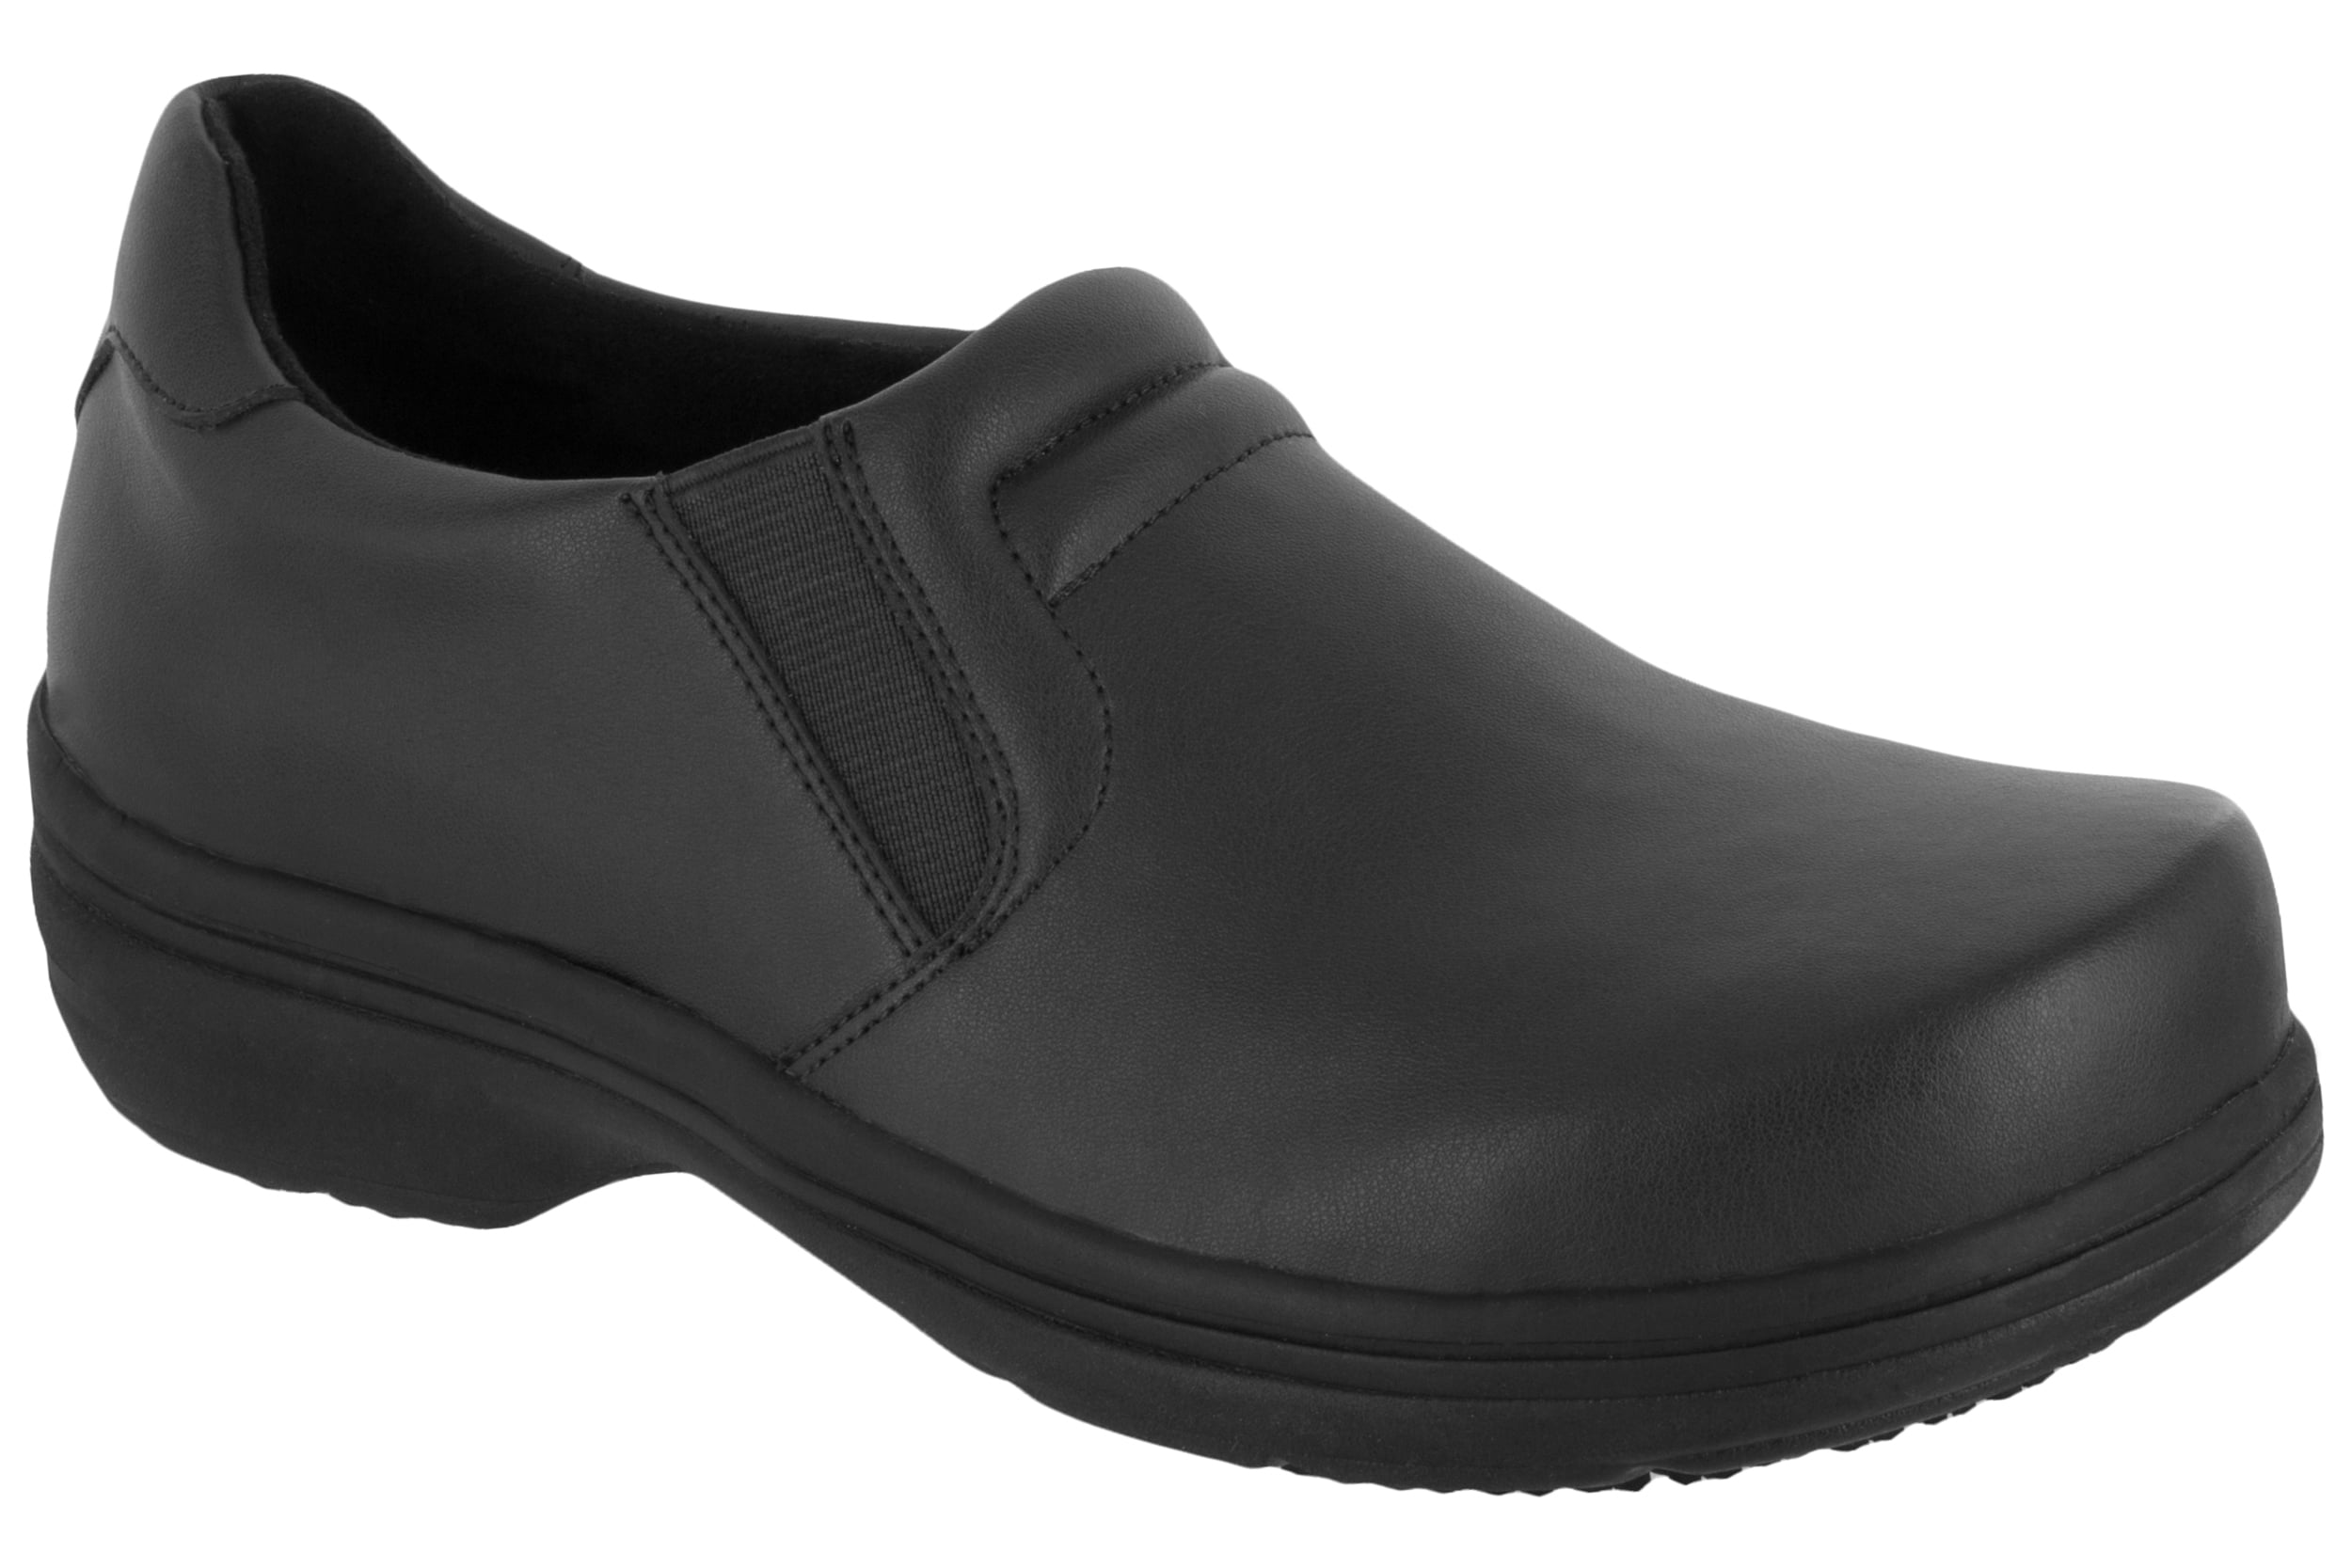 Portwest Steelite Slip On Safety Shoes Hospital Medical Food Catering Chef FW81 